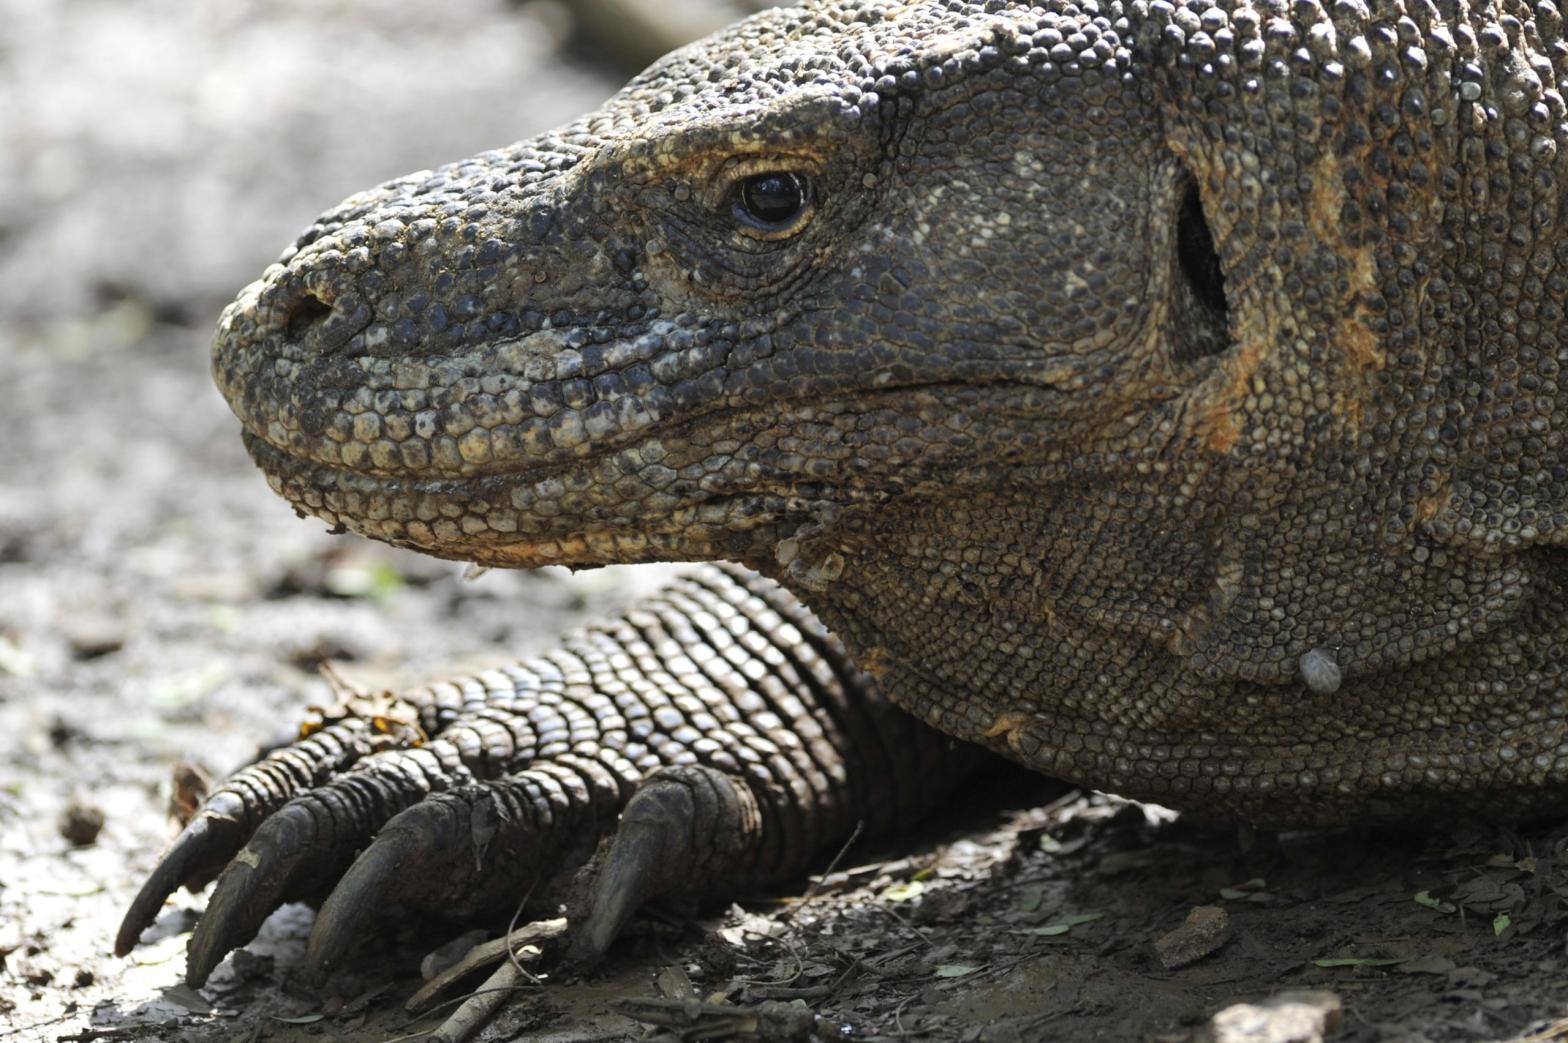 A Komodo dragon photographed in 2010. (Photo: ROMEO GACAD/AFP, Getty Images)